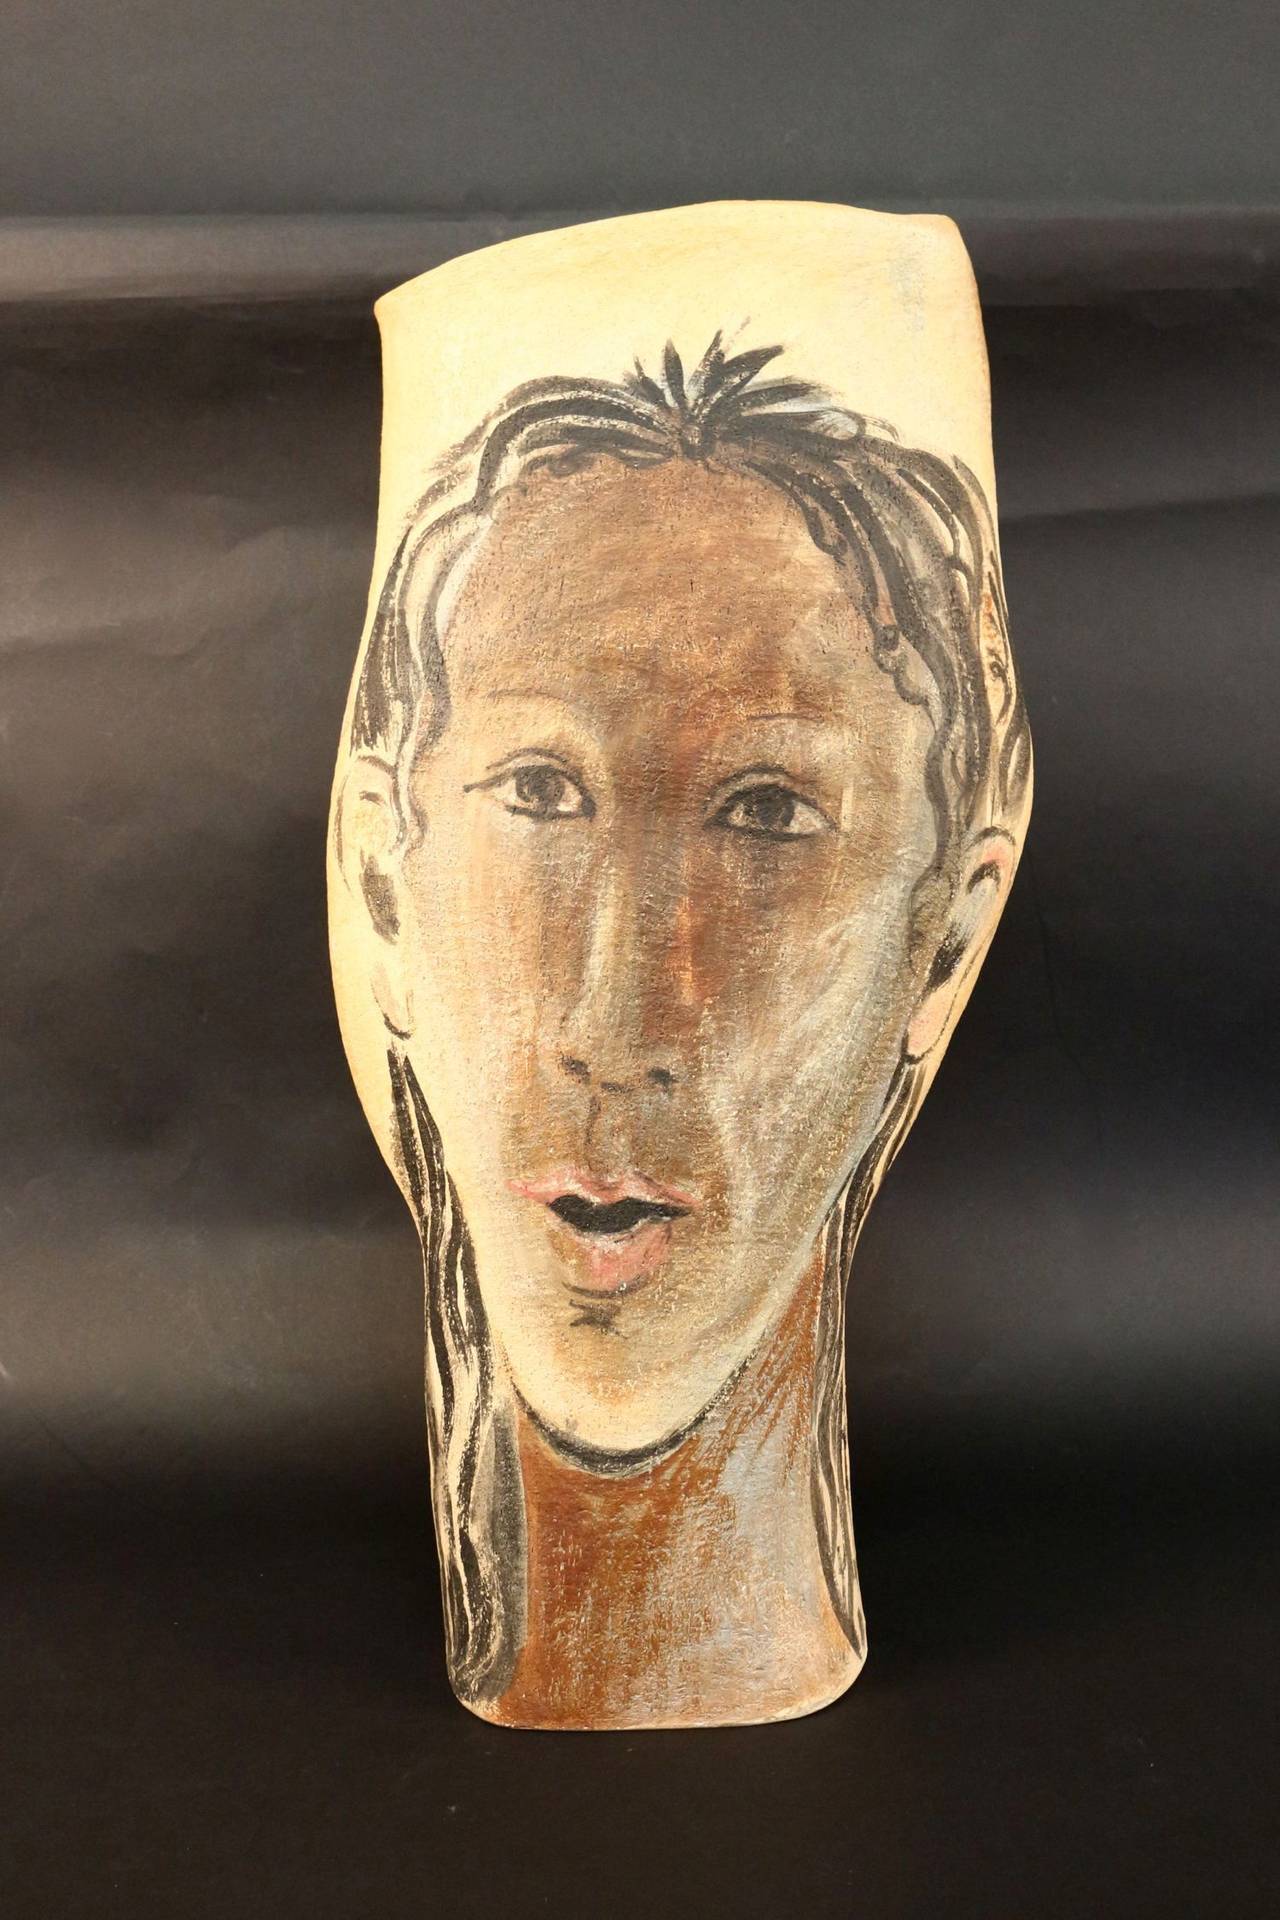 Umbrella holder or large vase signed Albert Poizat, 2002.
In handmade earthenware, two faces are painted by the artist on each side of the object, standing out on a light yellow background.
The interior is glazed in black.
The signature is located